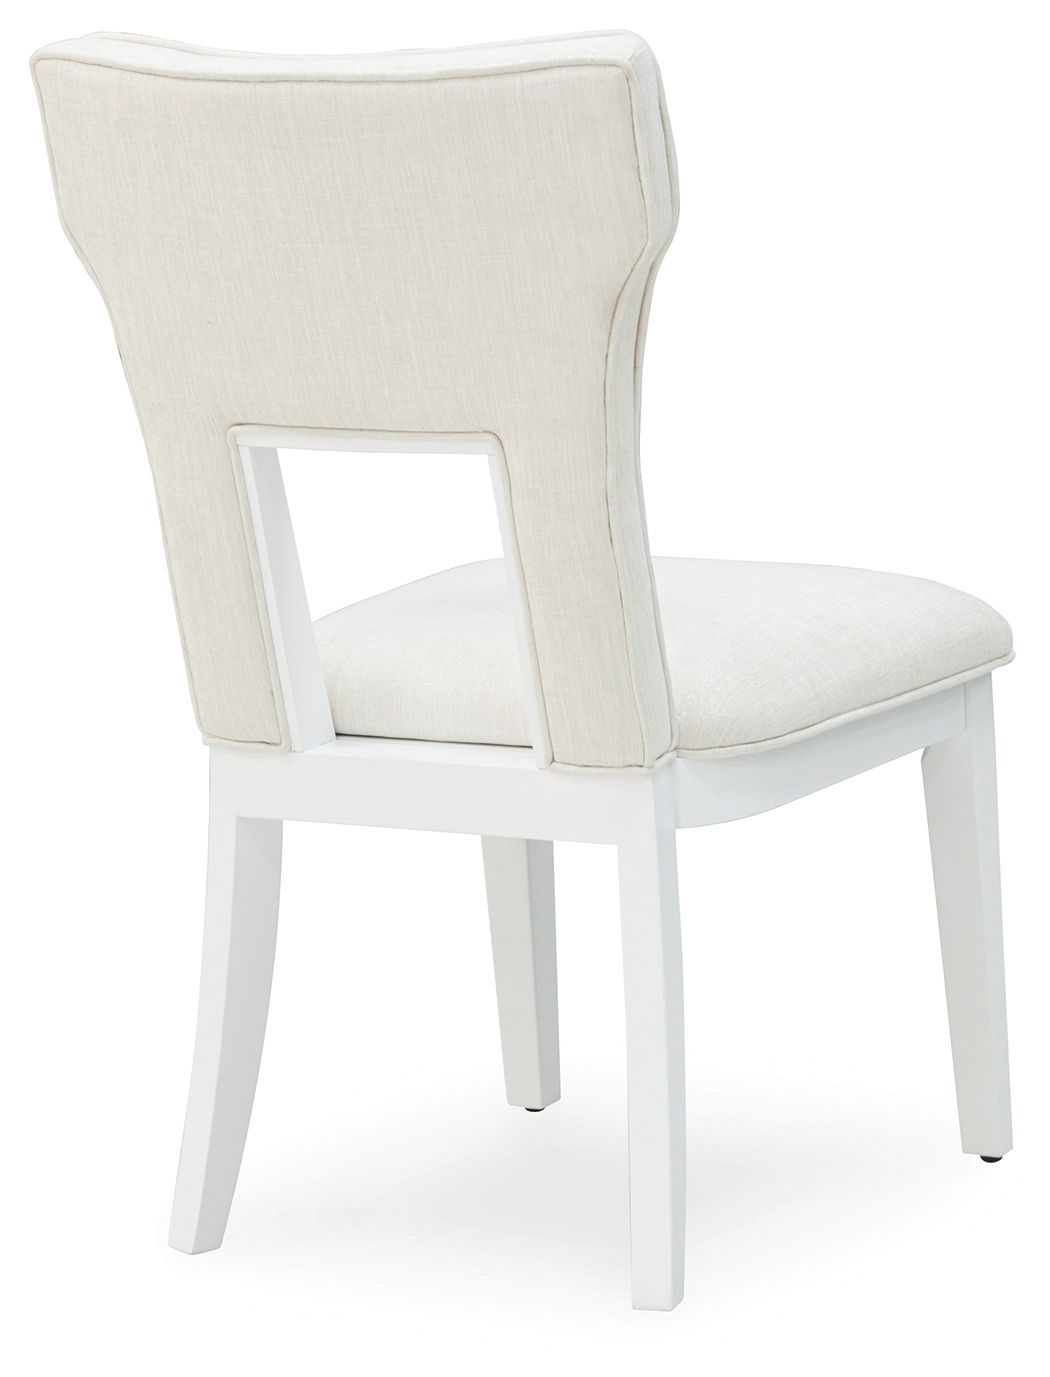 Chalanna - White - Dining Upholstered Side Chair (Set of 2) - Tony's Home Furnishings